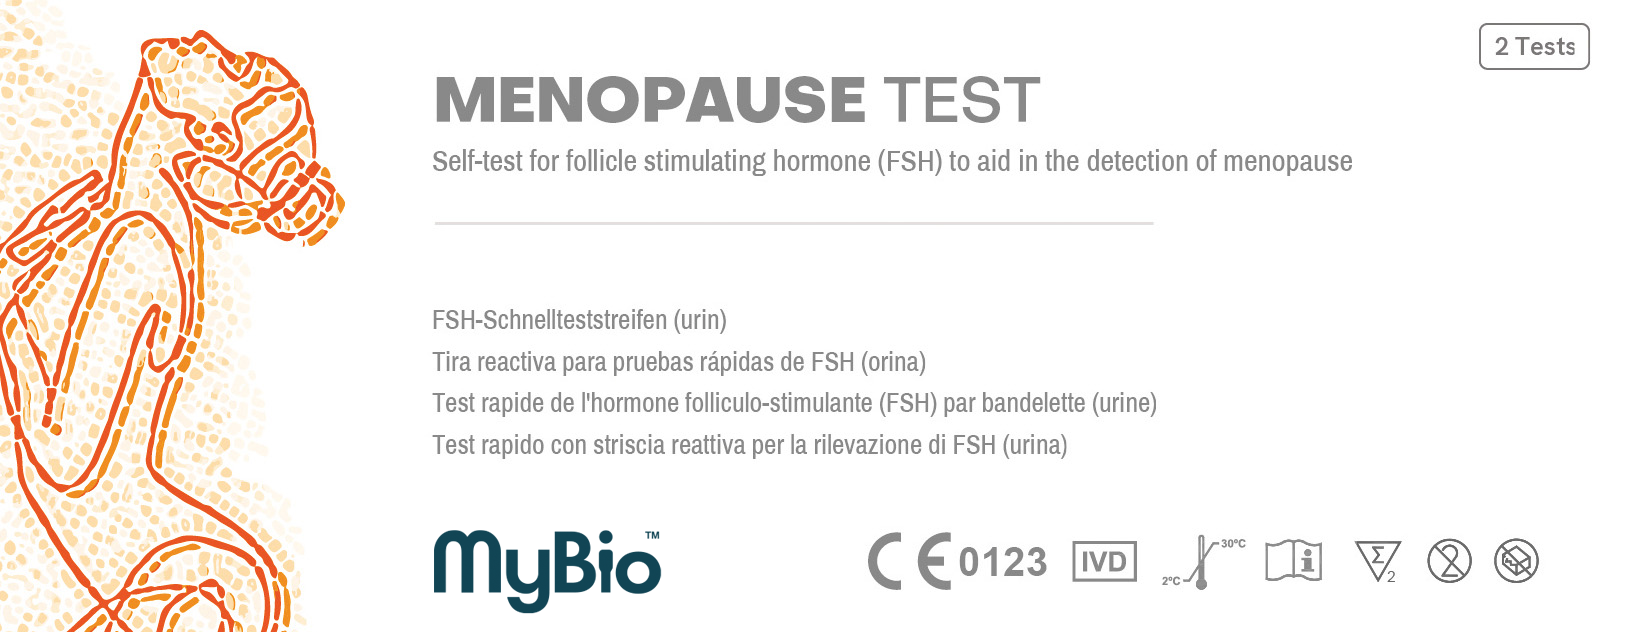 MyBio Menopause At Home Self Test (2 tests) image cover